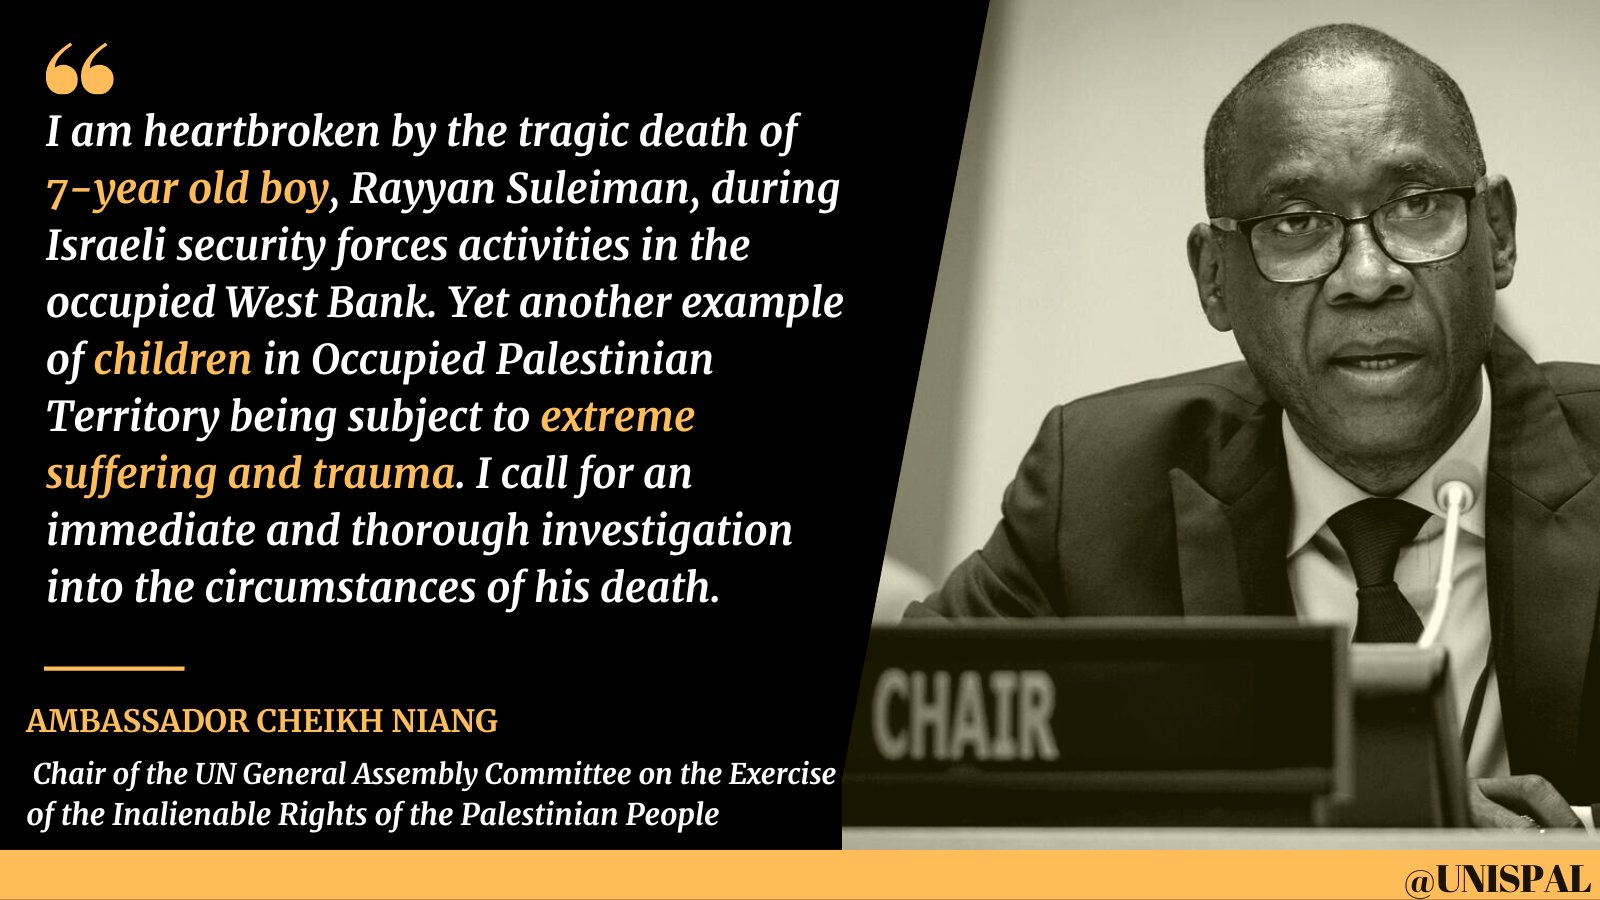 UN Palestinian Rights Committee on X: ‼️ Death of 7-year old  #RayyanSuleiman is yet another example of #children in the Occupied  #Palestinian Territory being subject to extreme suffering and trauma, says  the